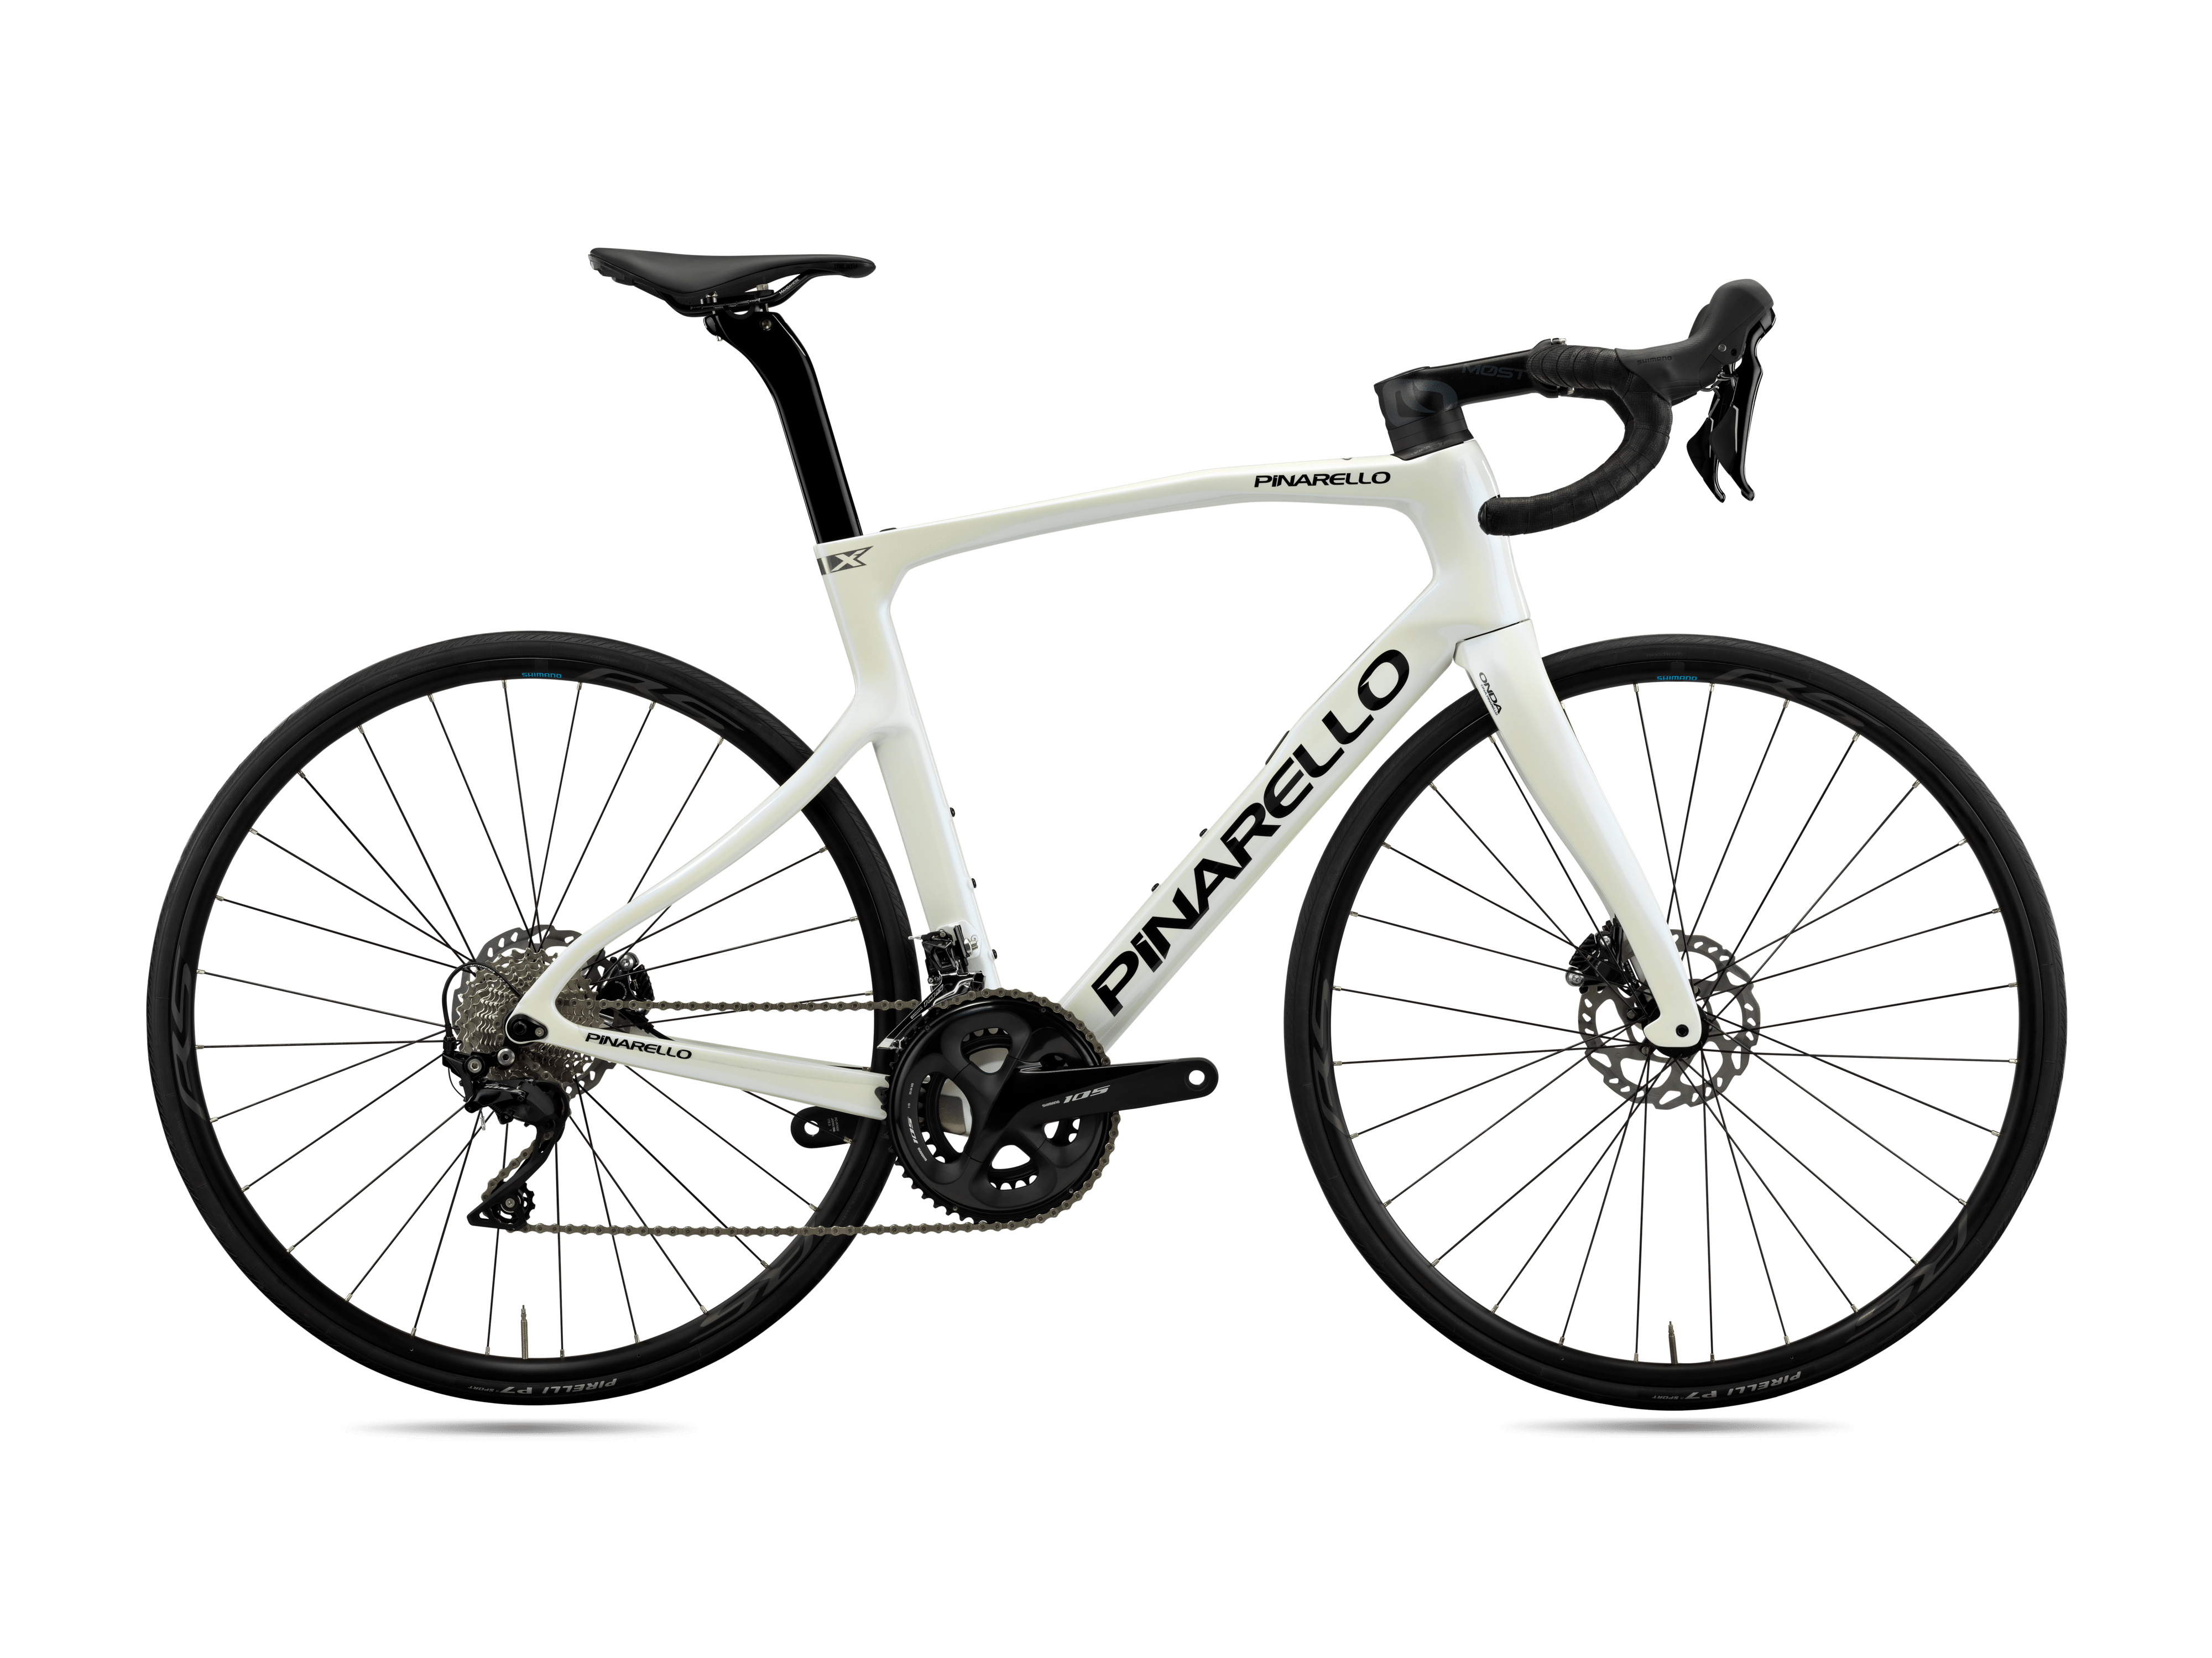 White Pinarello X1 carbon endurance road bike with Shimano 105 groupset and hydraulic disc brakes.